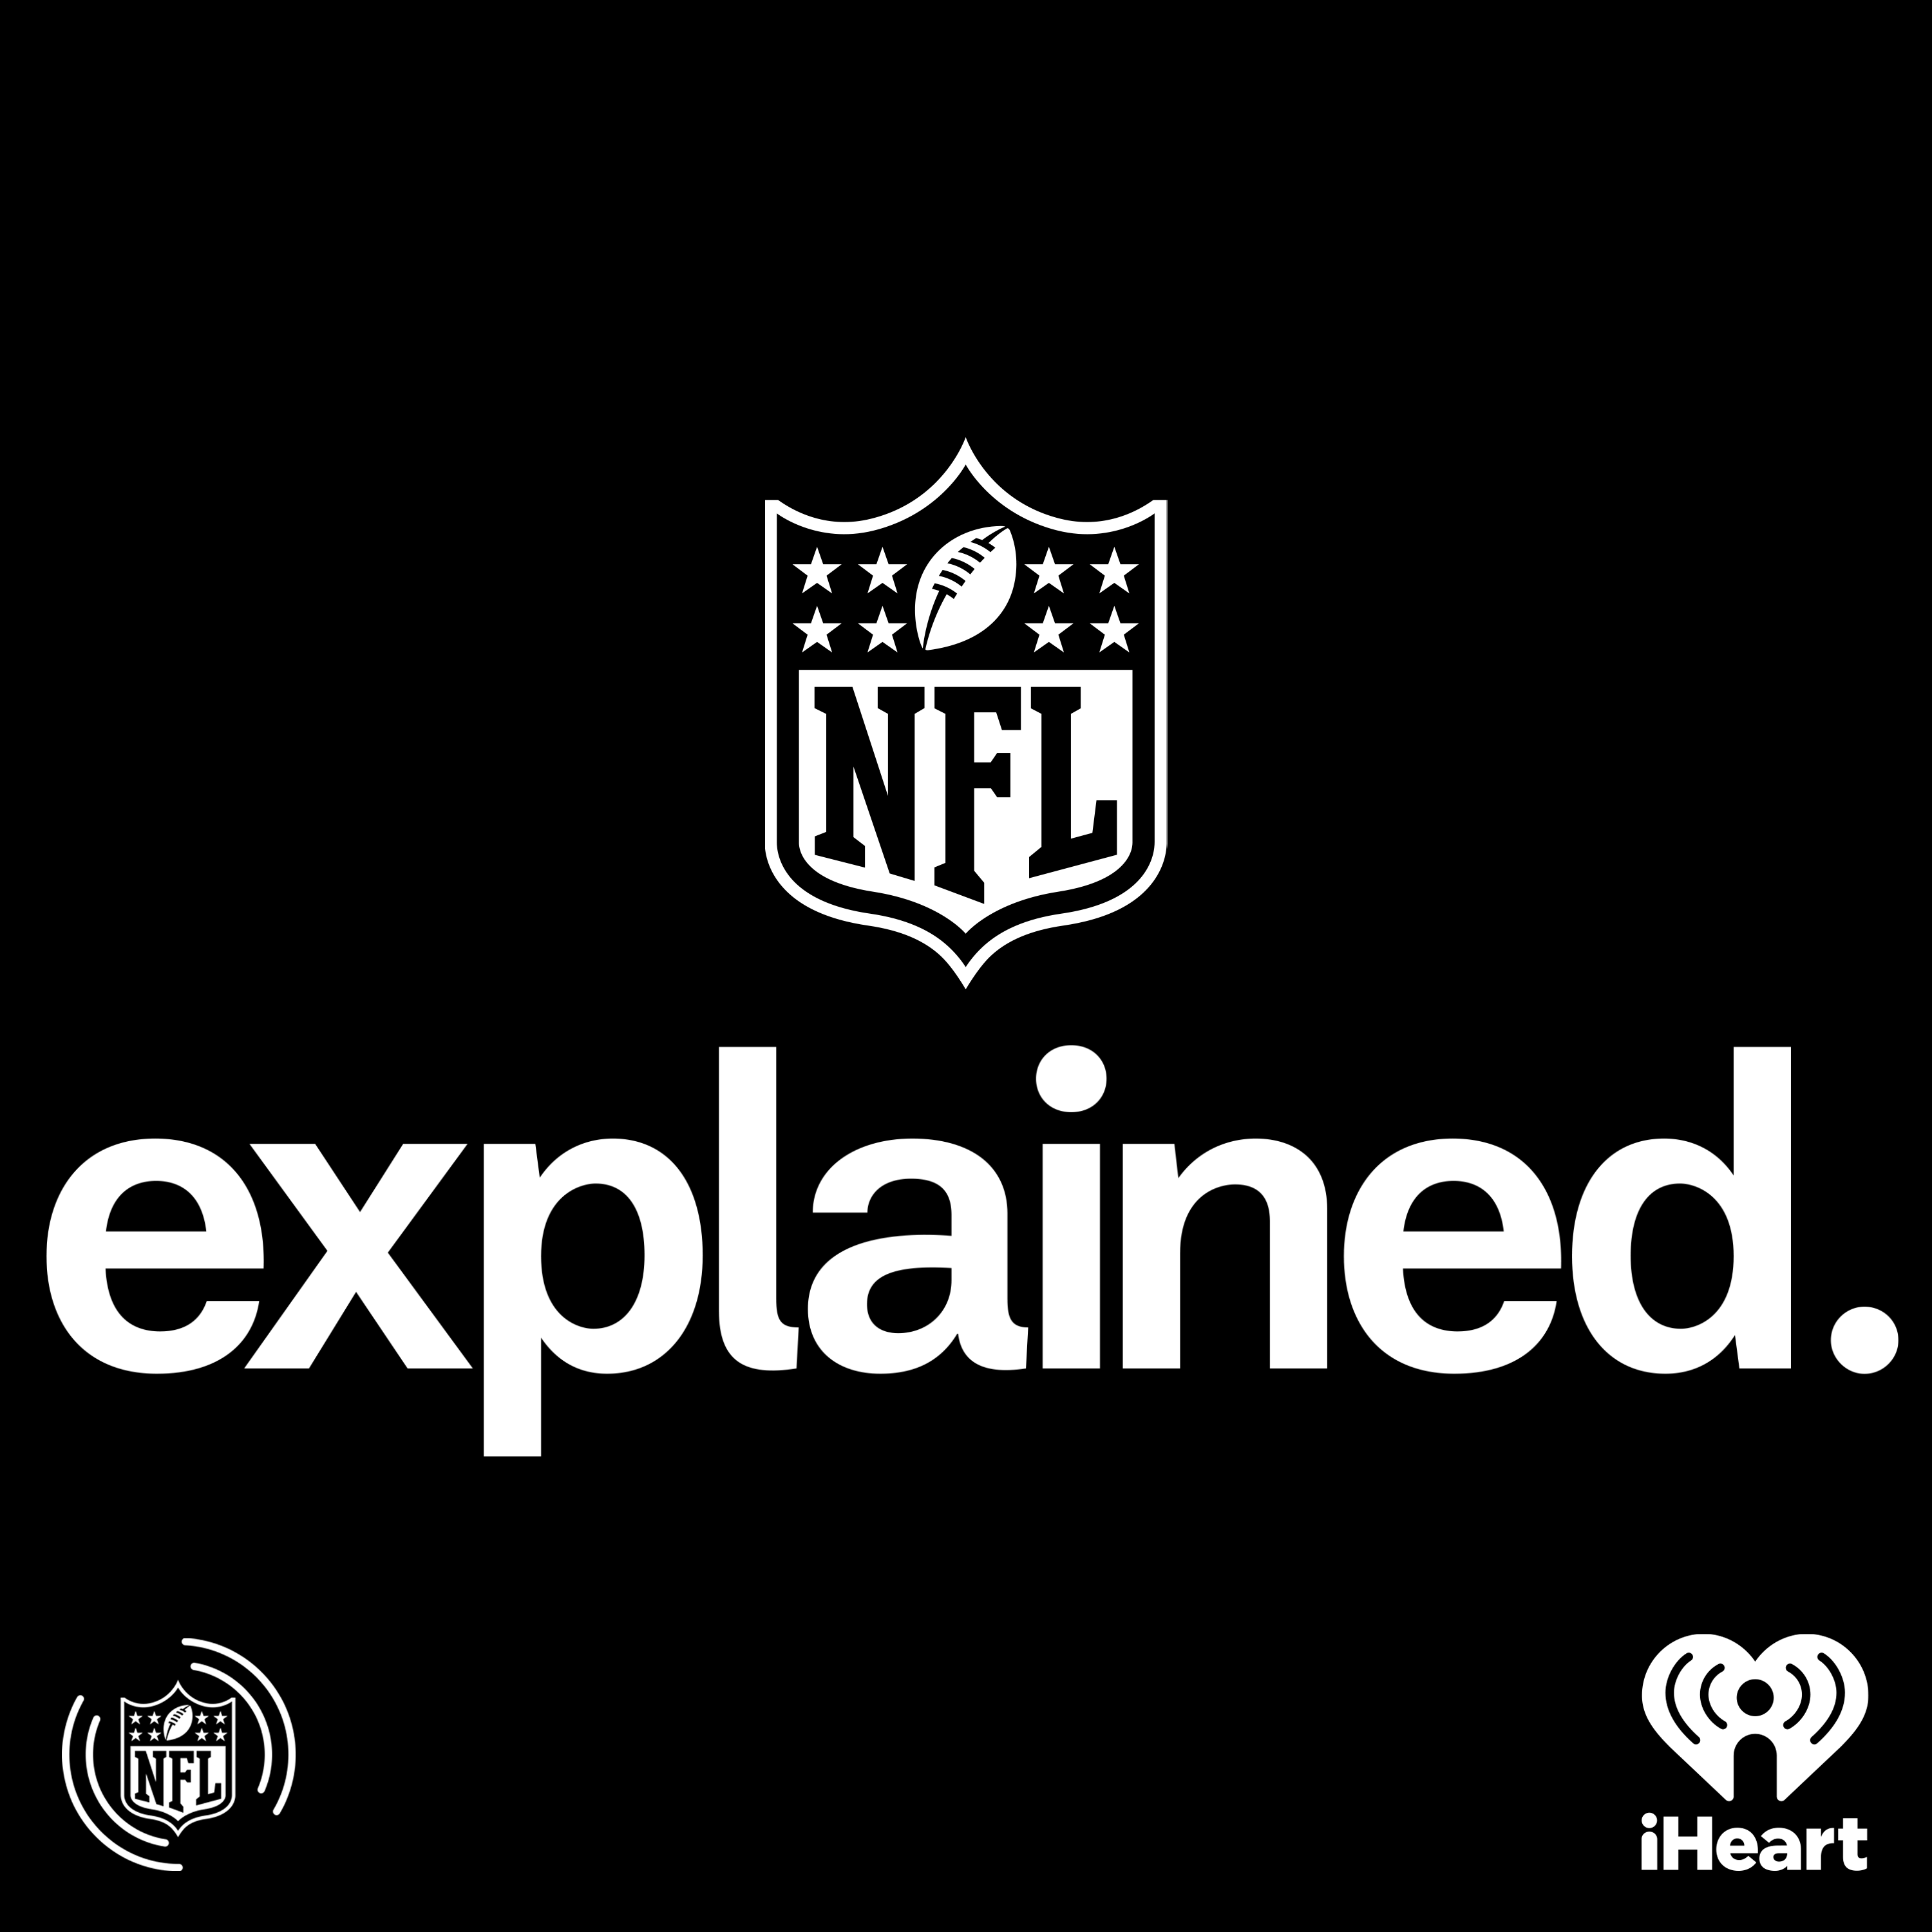 Introducing: NFL explained.